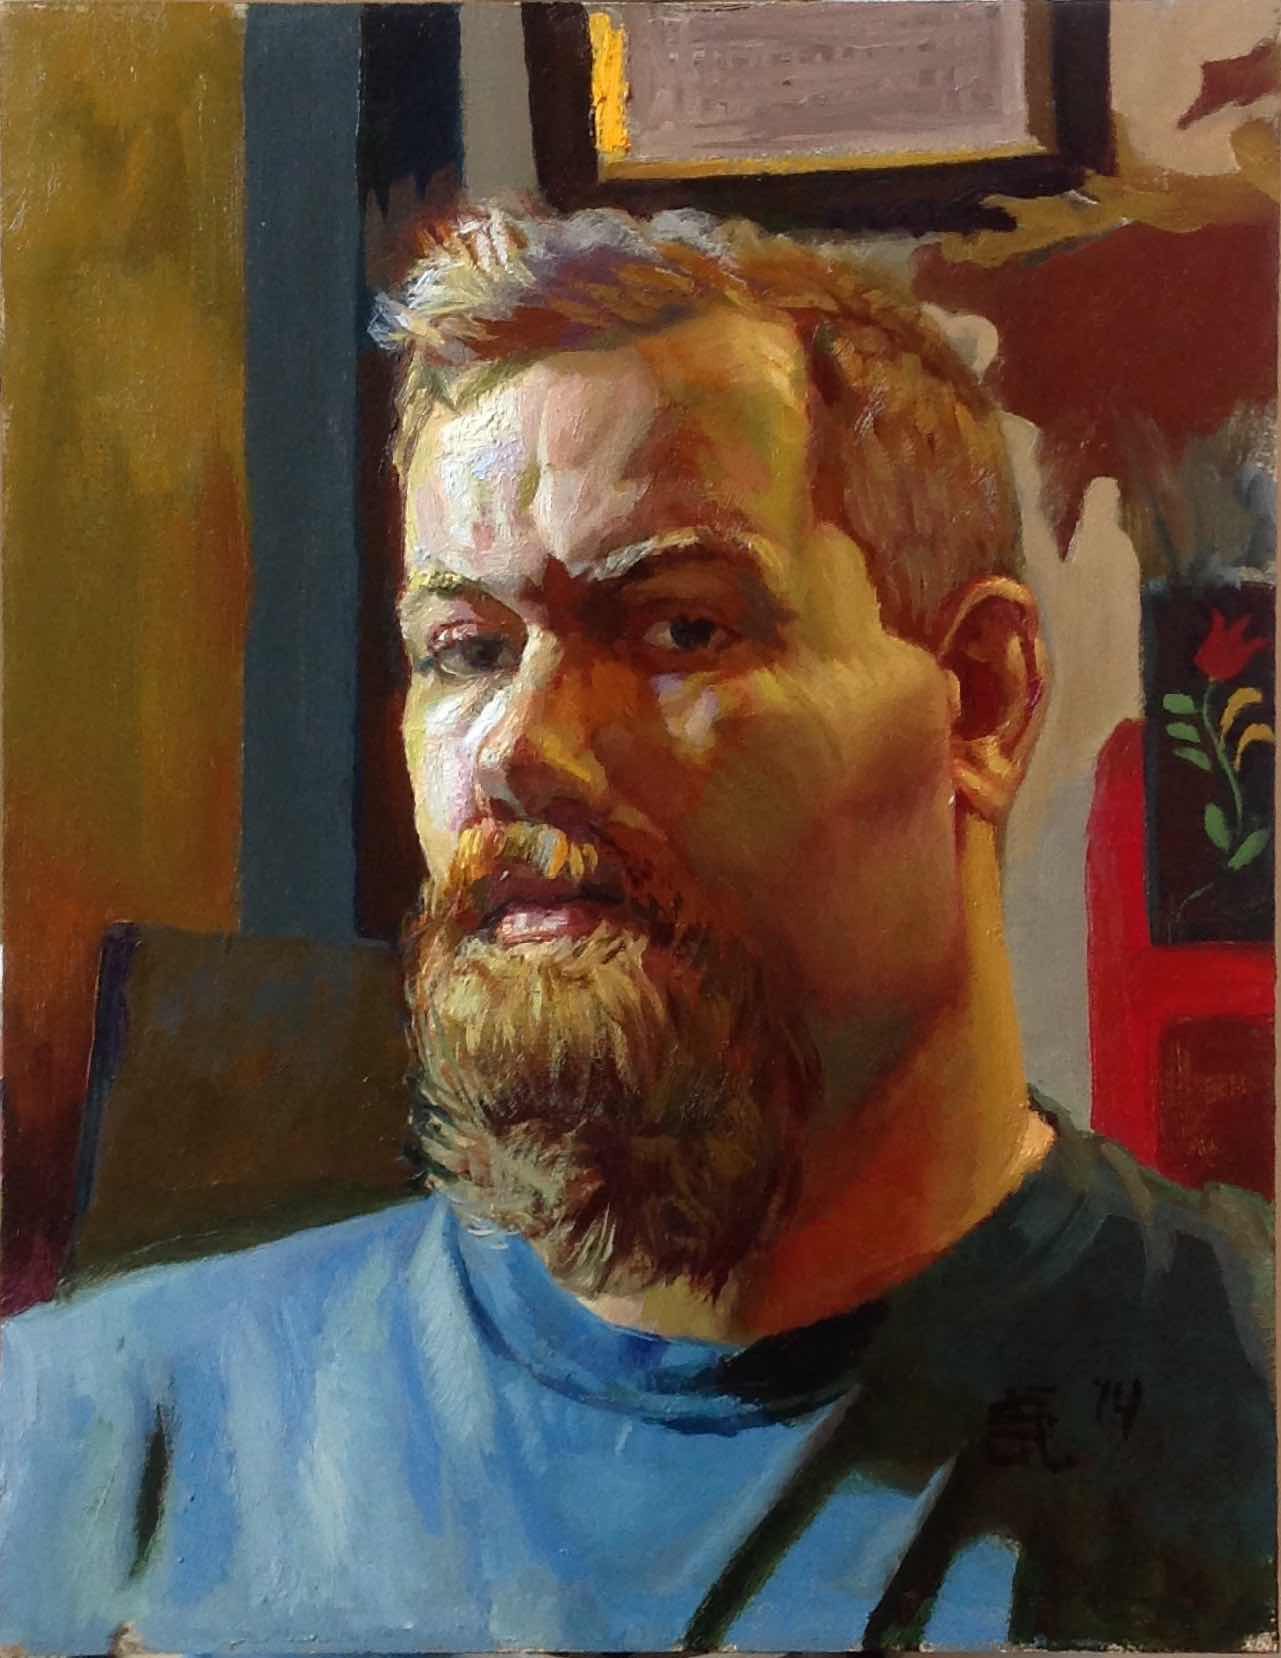 Pencil Holder(Self Portrait)
11x14 inches oil on panel 2015